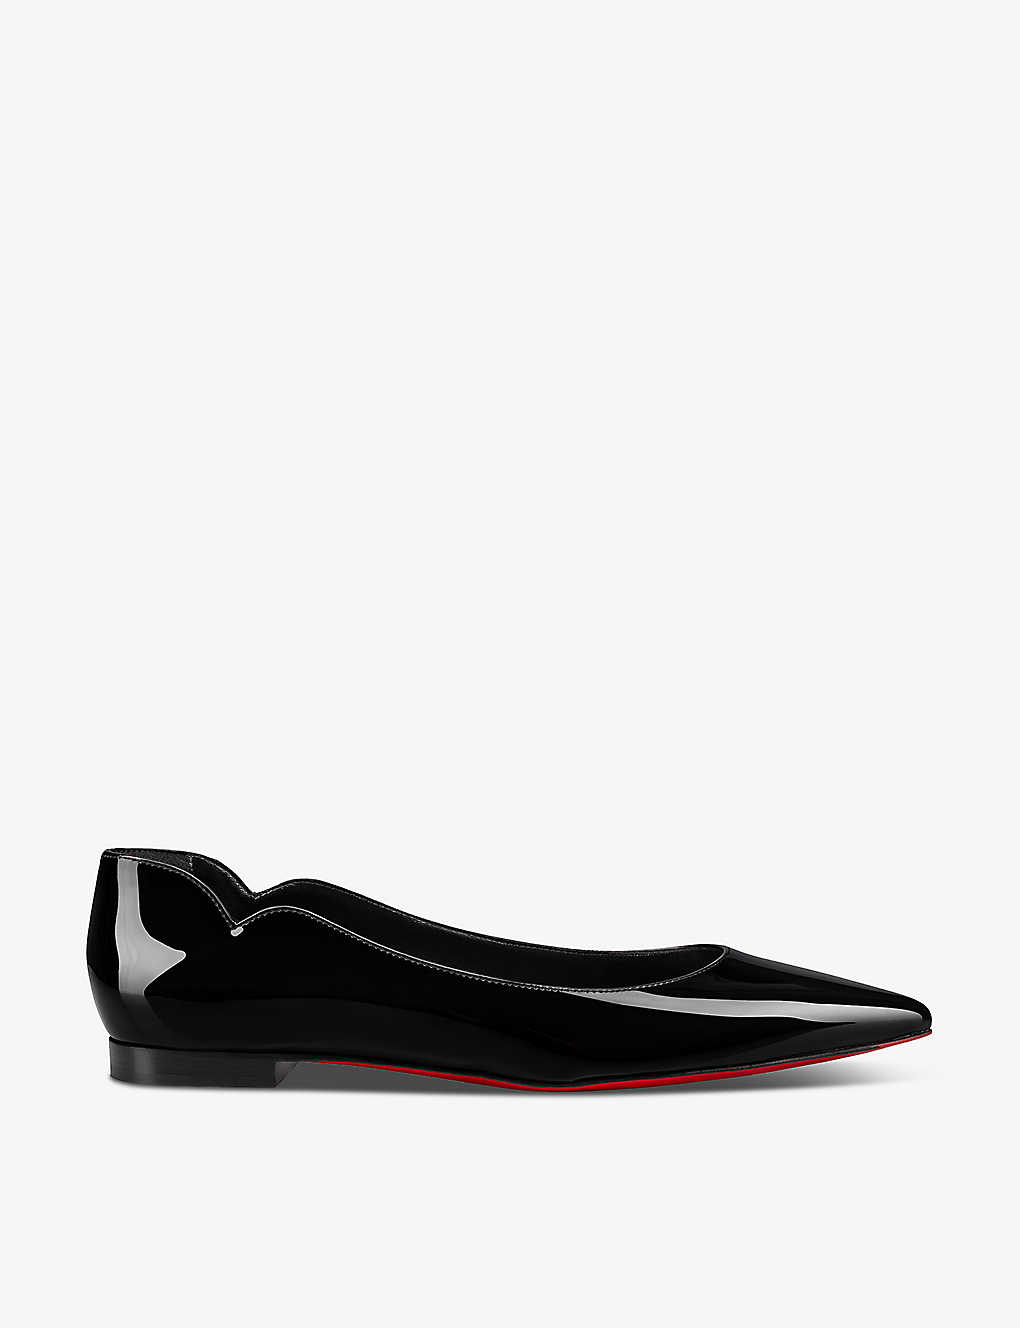 Shop Christian Louboutin Women's Black Hot Chickita Pointed-toe Patent-leather Pumps